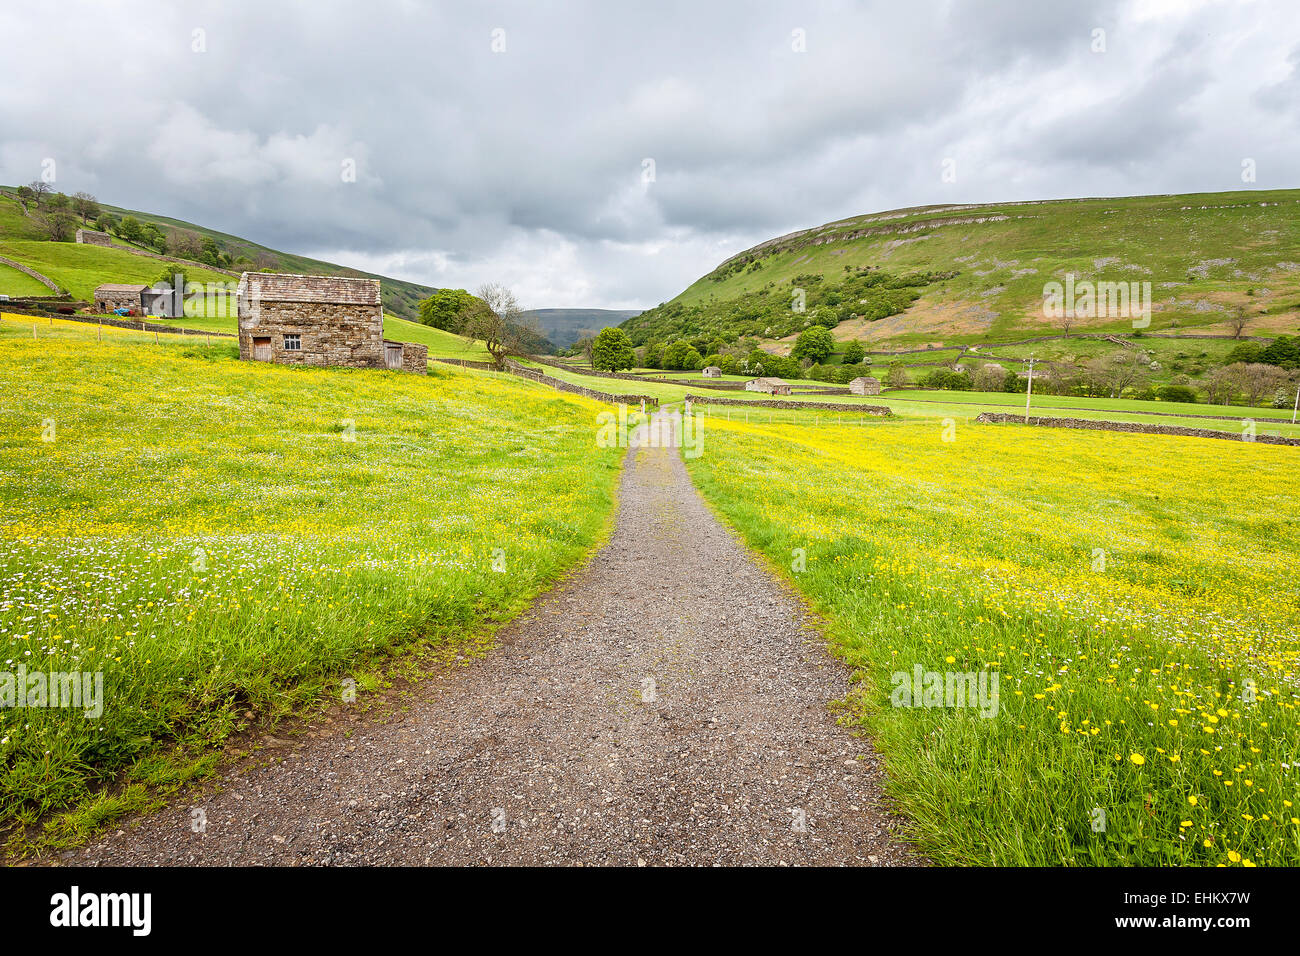 The haymeadows of Muker filled with wildflowers. Swaledale, Yorkshire Dales National Park. Stock Photo